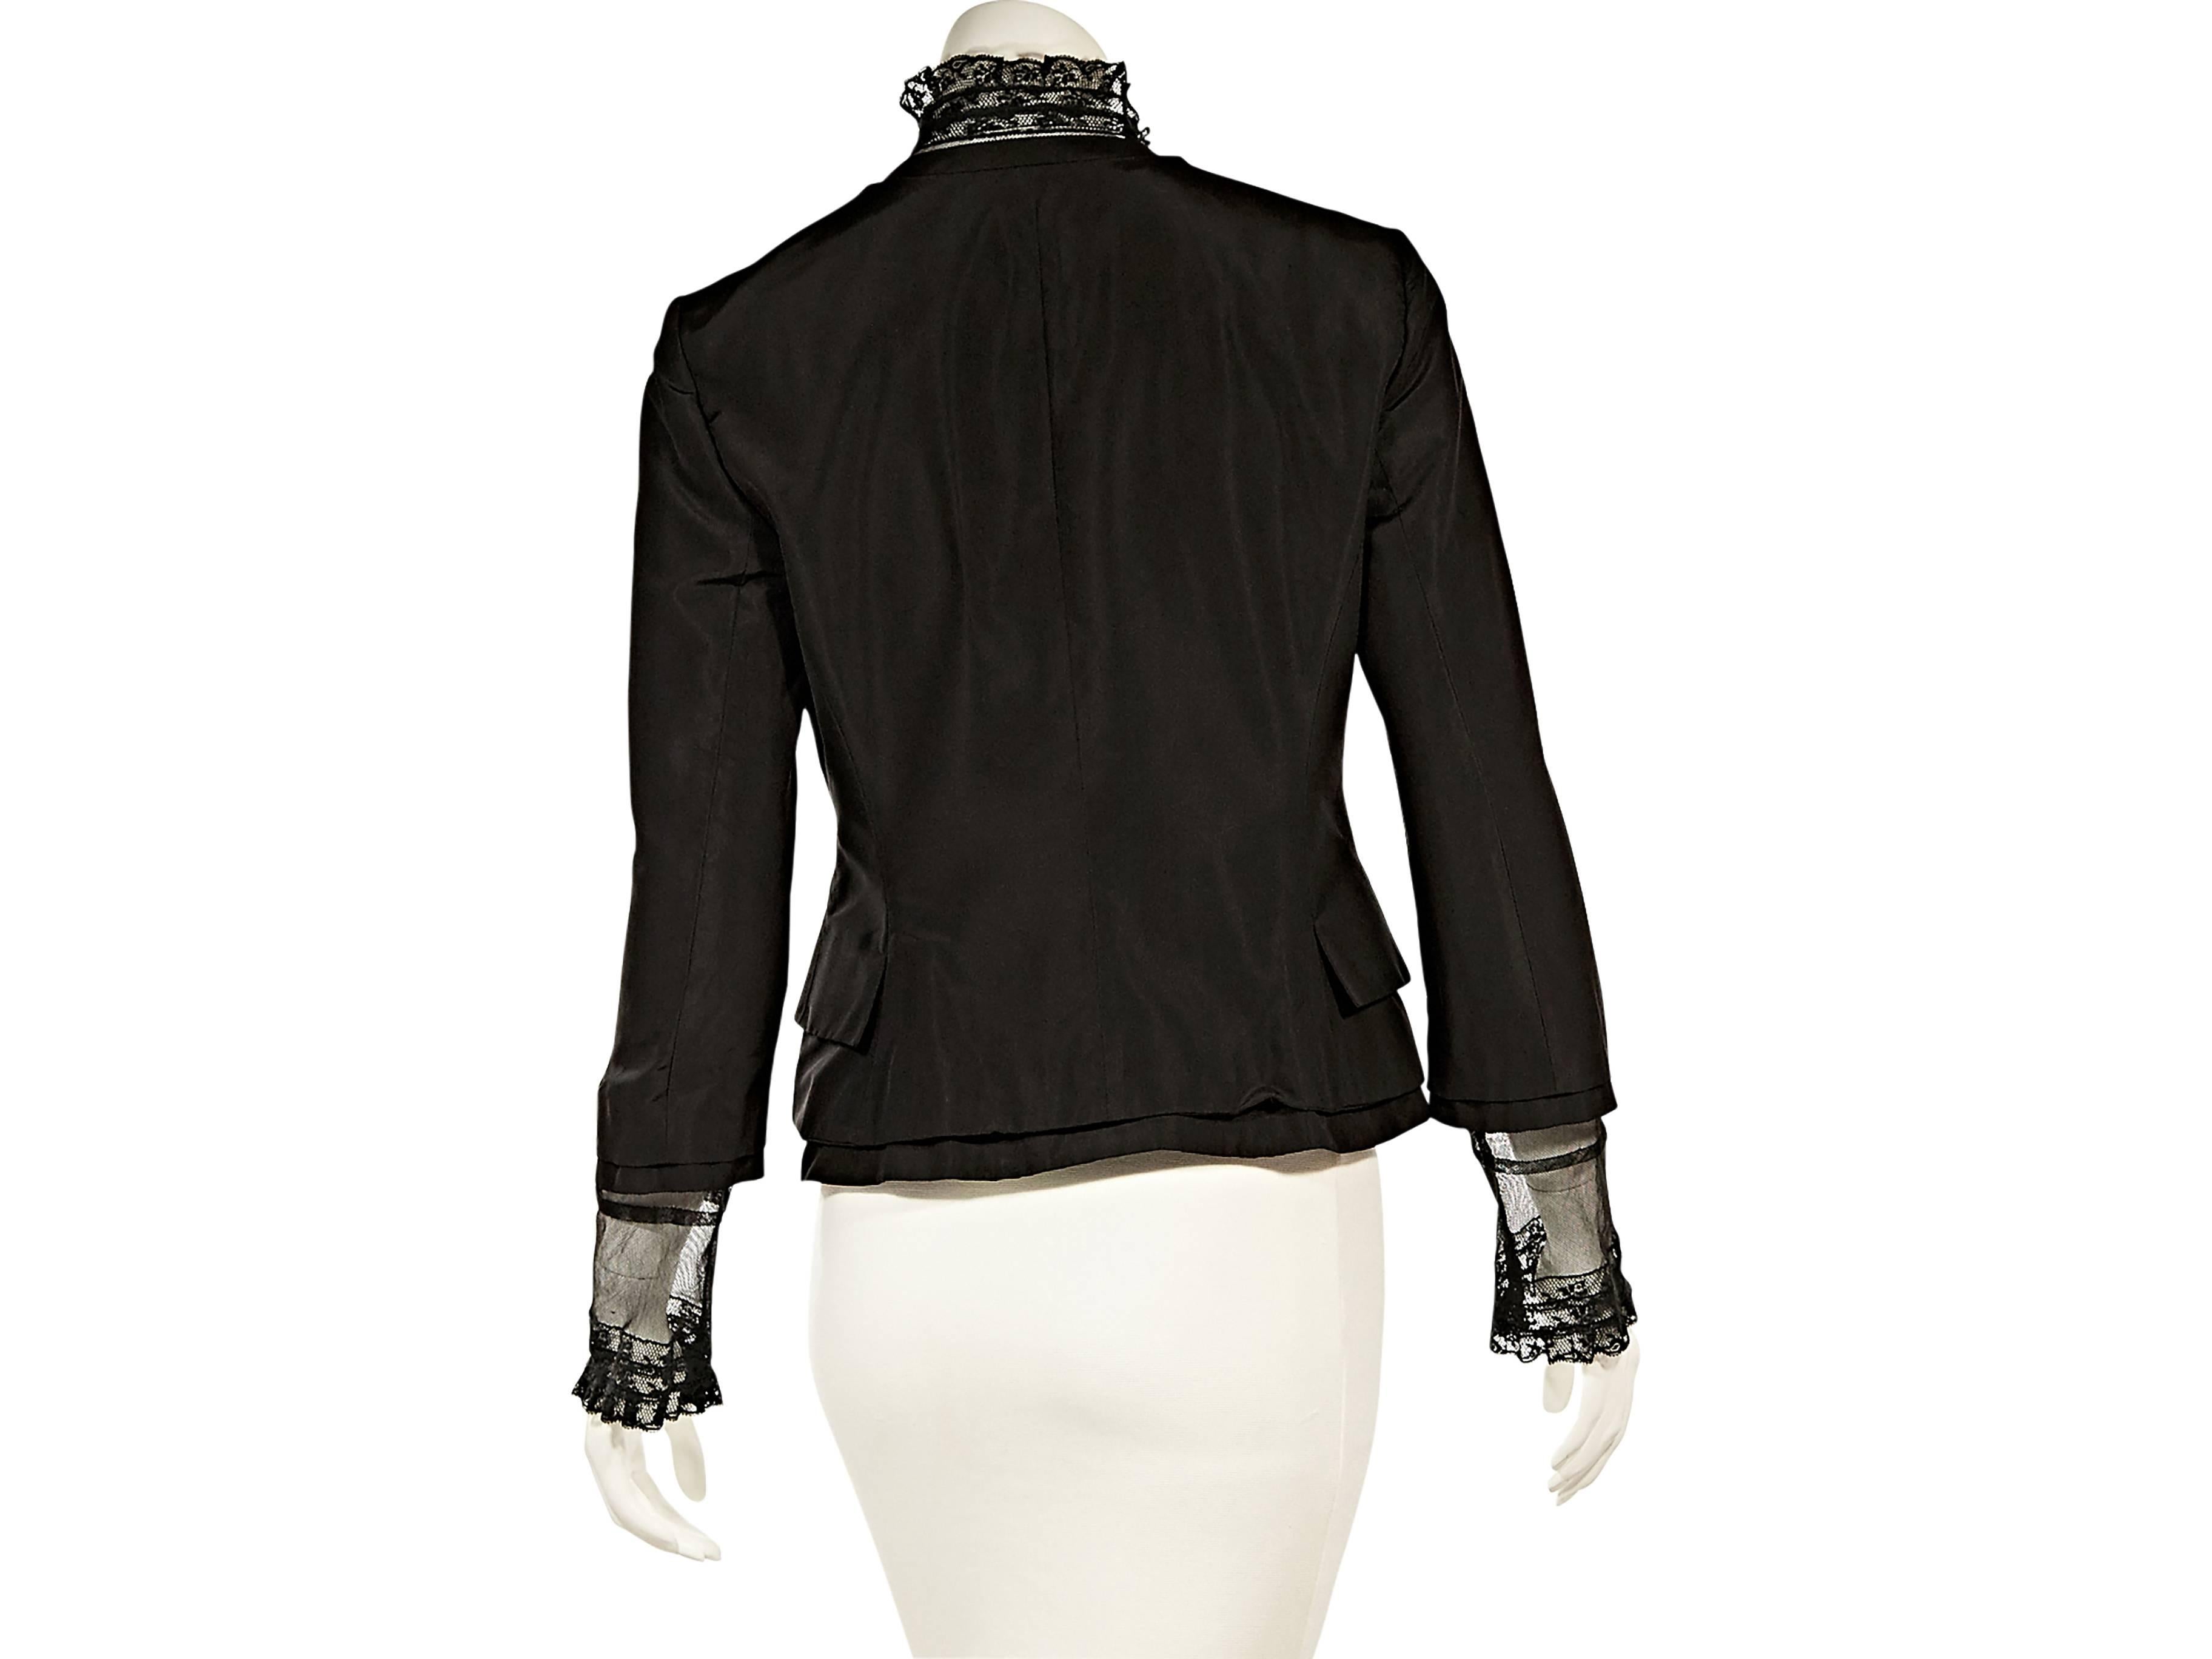 Product details:  Black Victorian-inspired jacket by Alexander McQueen.  Mock neck.  Long sleeves with lace cuffs.  Front tab closure.  Lace front with button closure.  Waist flap pockets.   
Condition: Excellent.  